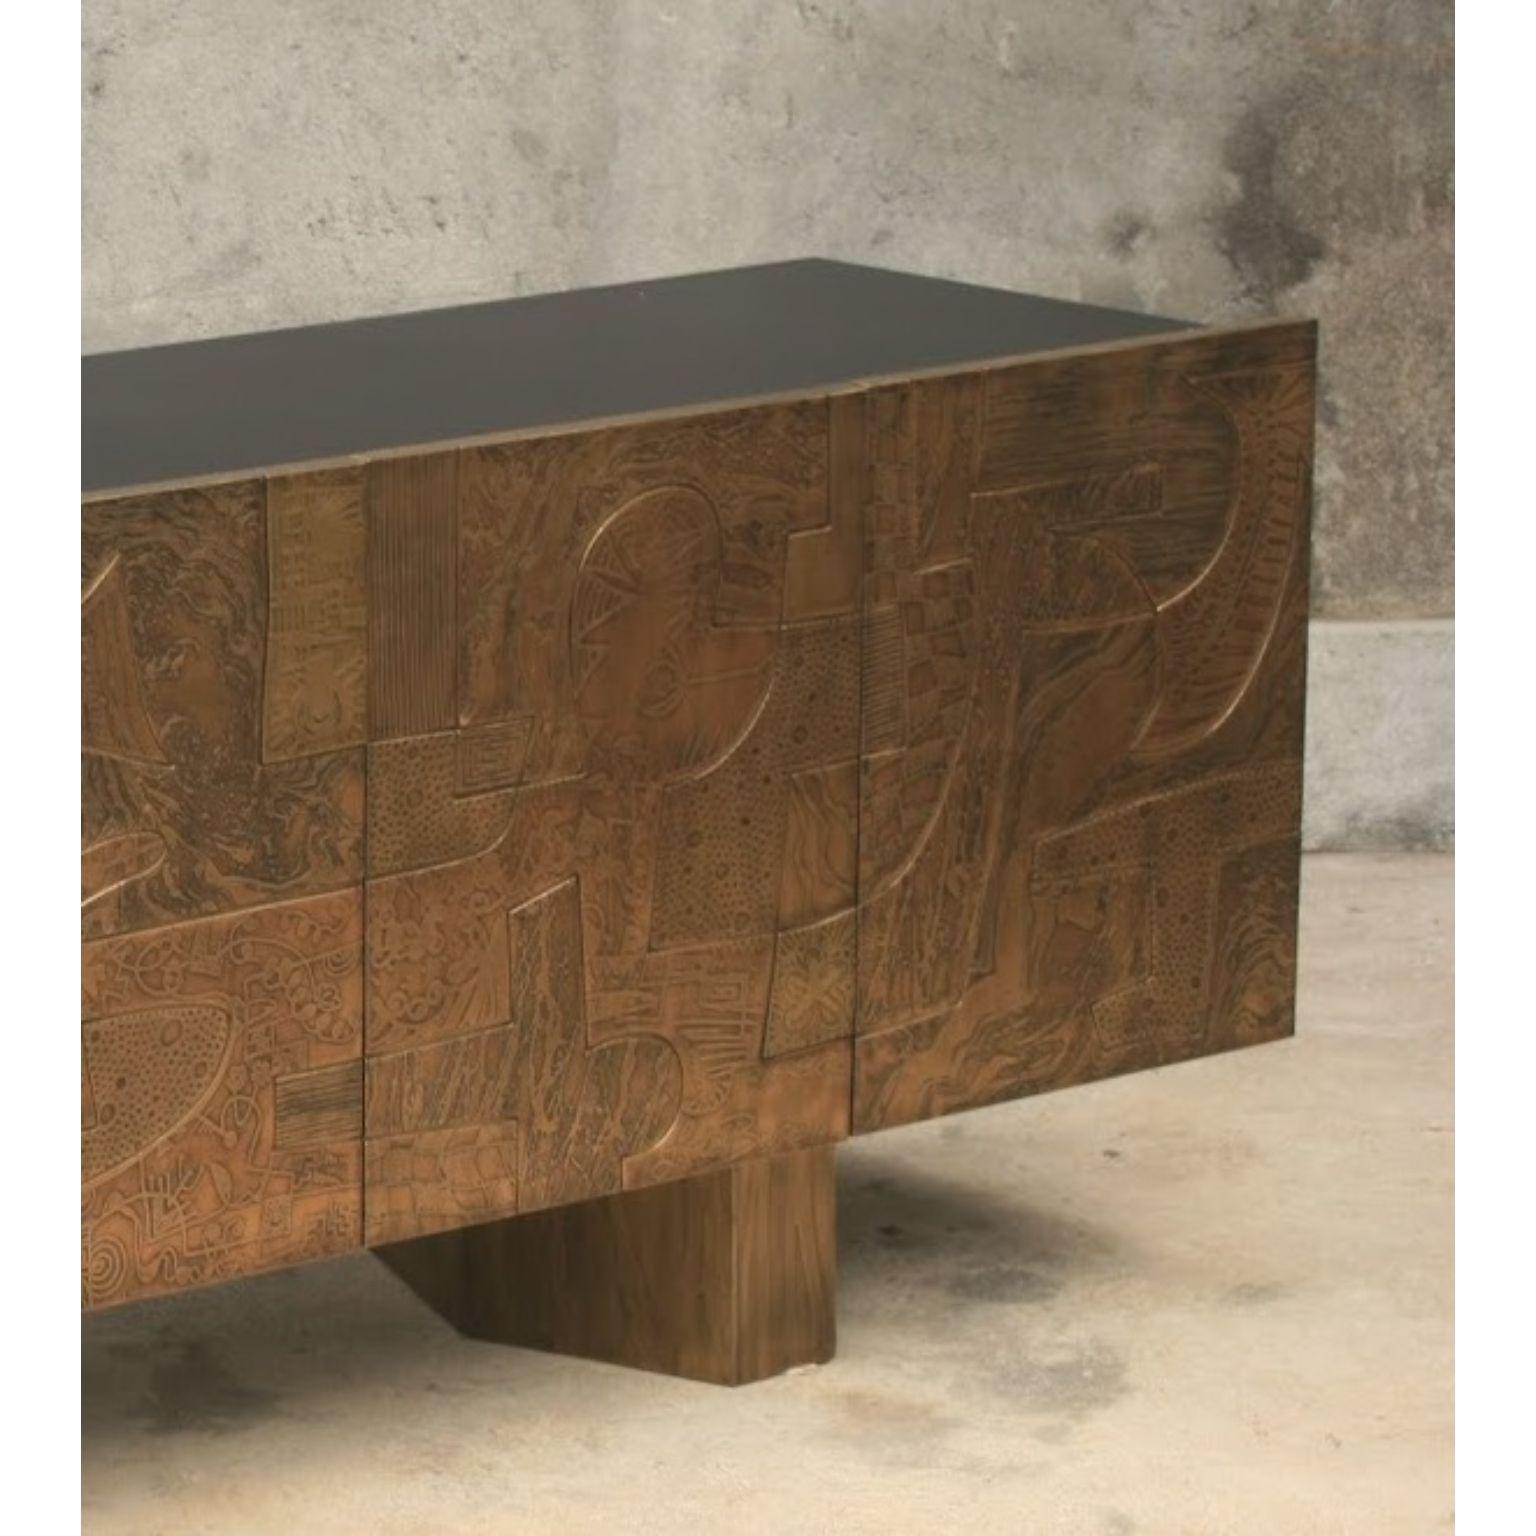 Other Front Plated in Acid-Etched Copper 5D Cabinet by Brutalist Be For Sale